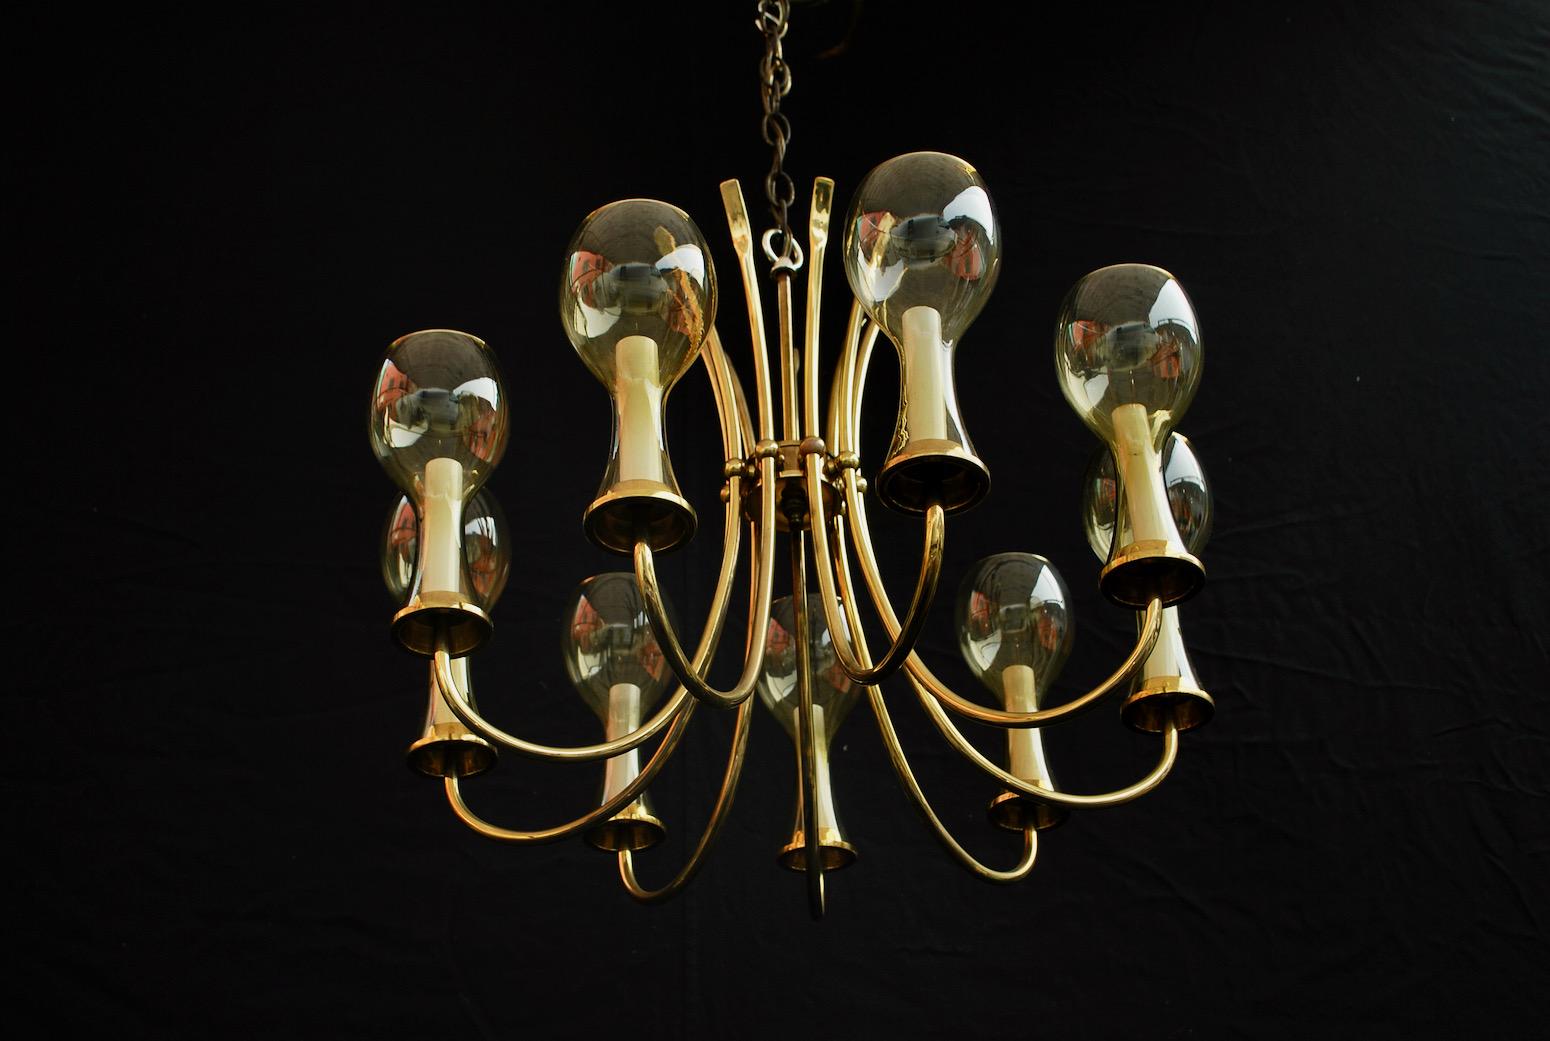 A beautiful and sexy 1960's chandelier, what I like about this chandelier, it has two style, modern and Classic together.